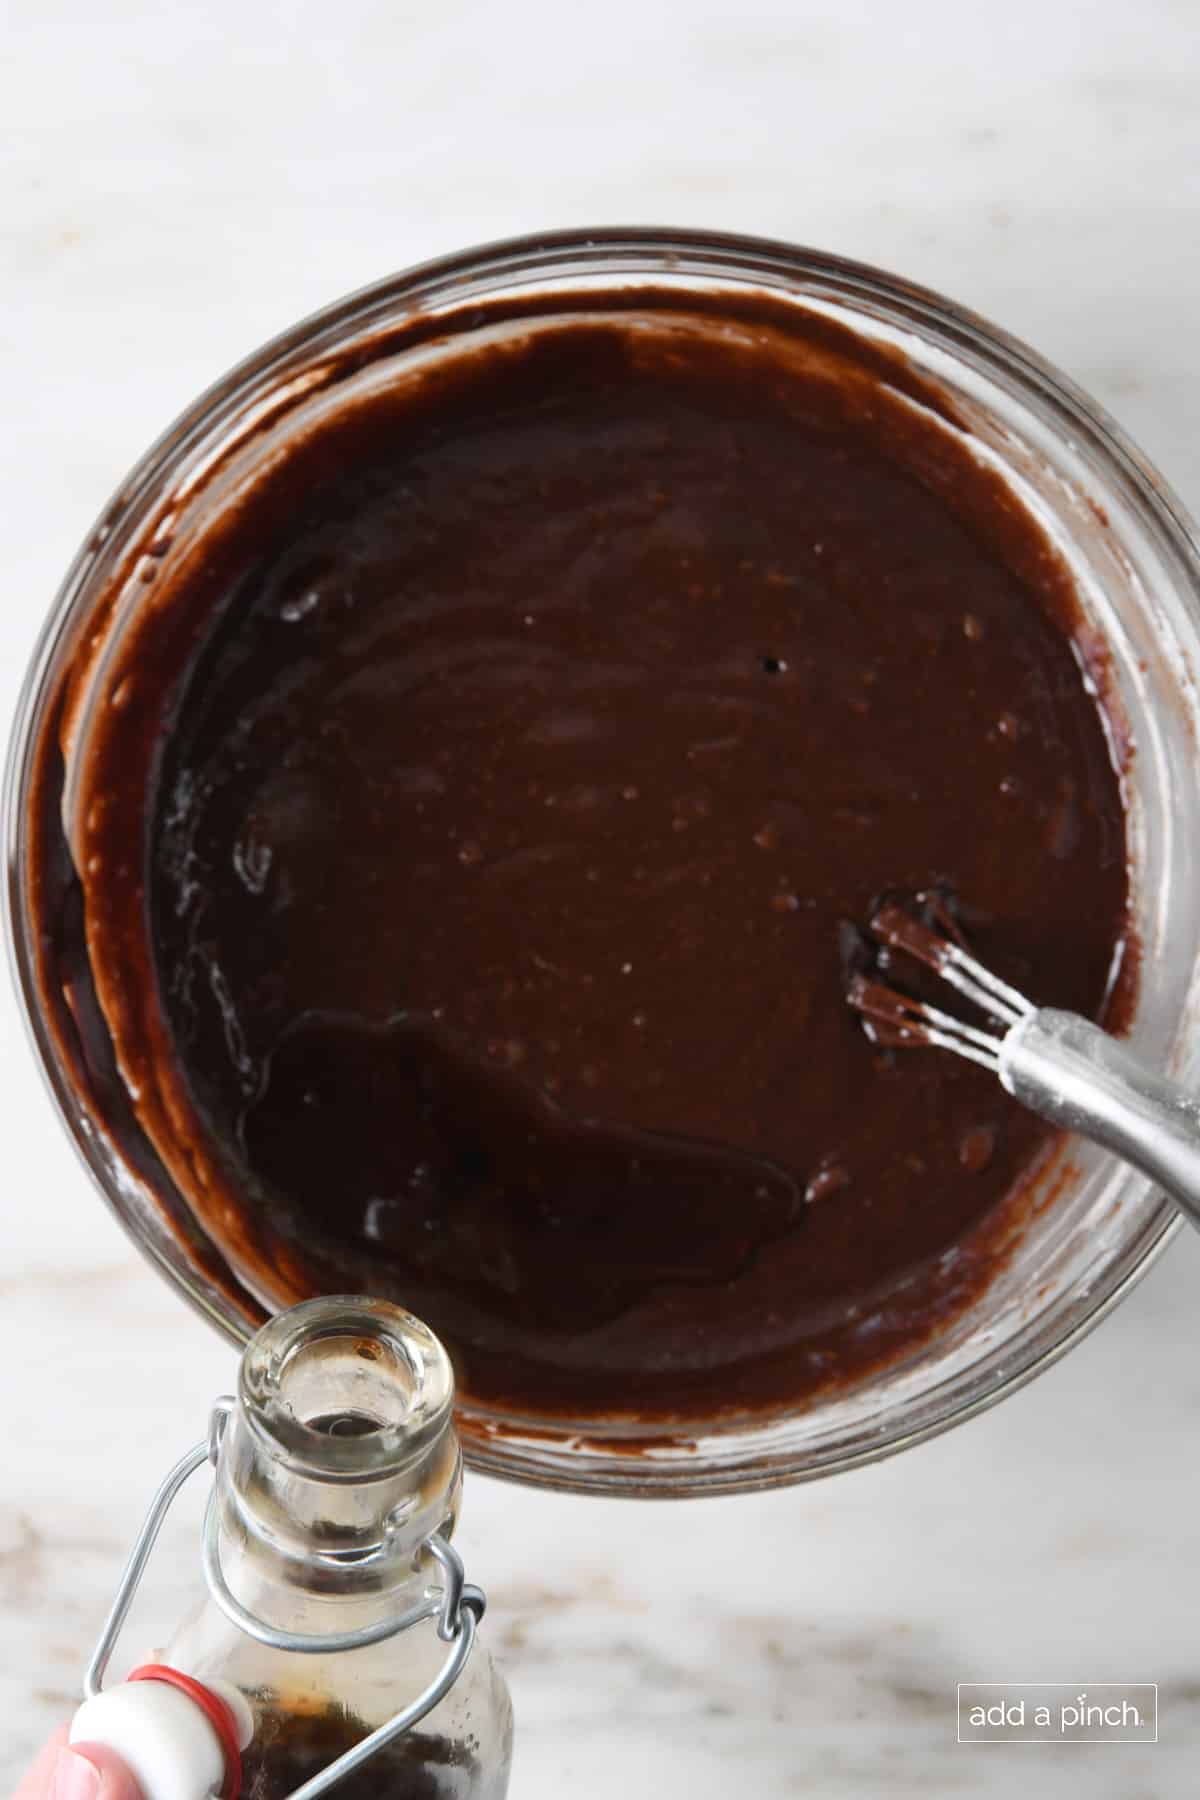 Vanilla extract added to melted brownie batter in a glass bowl with a wire whisk.